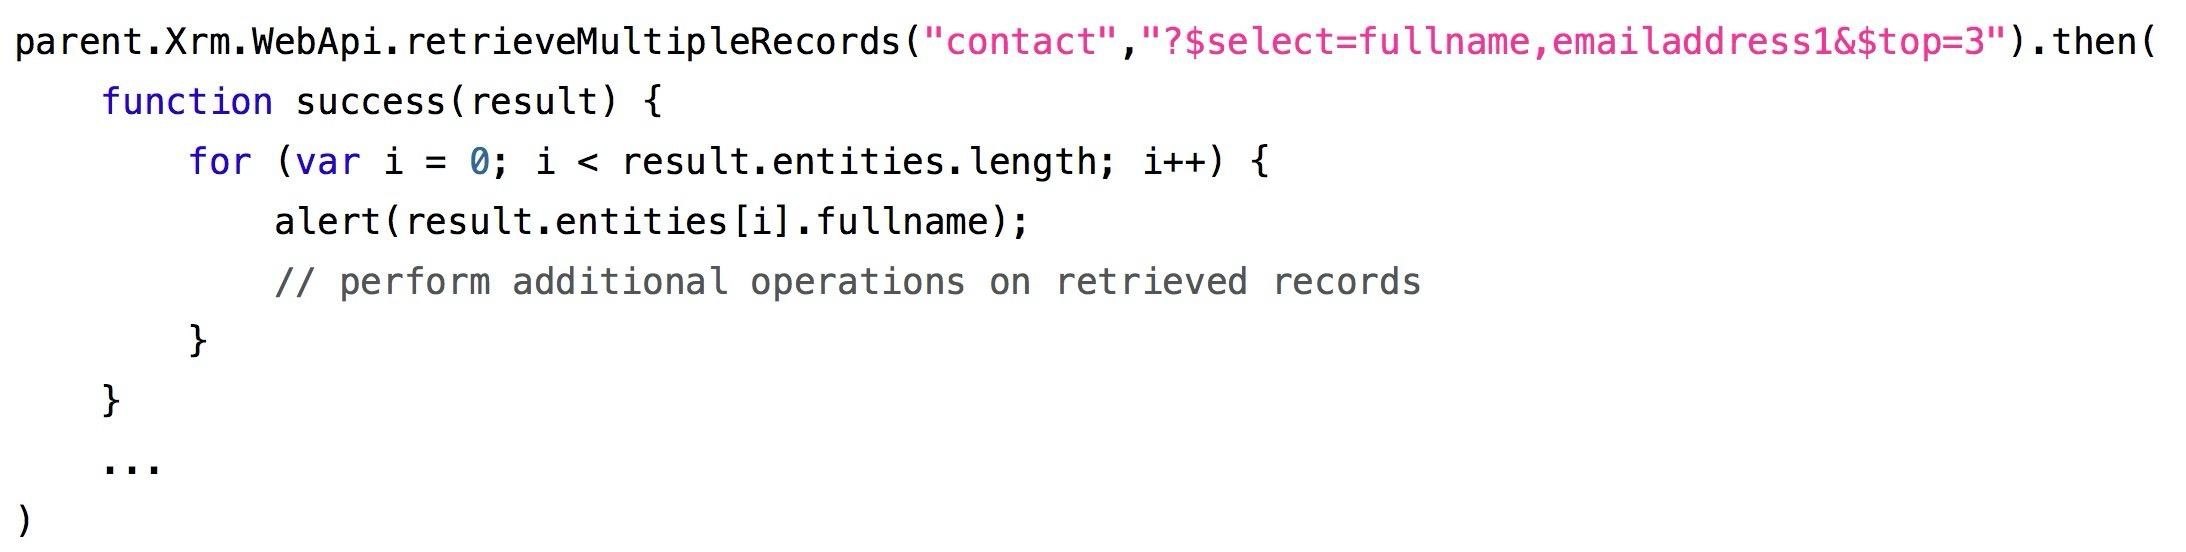 parent.Xrm.WebApi. retrieveMultipleRecords("contact",'"?$select=fullname, emailaddressi&$top=3").then(
function success(result) {
for (var i = 0; i < result.entities. length; i++) {
alert(result.entities [i].fullname) ;
// perform additional operations on retrieved records